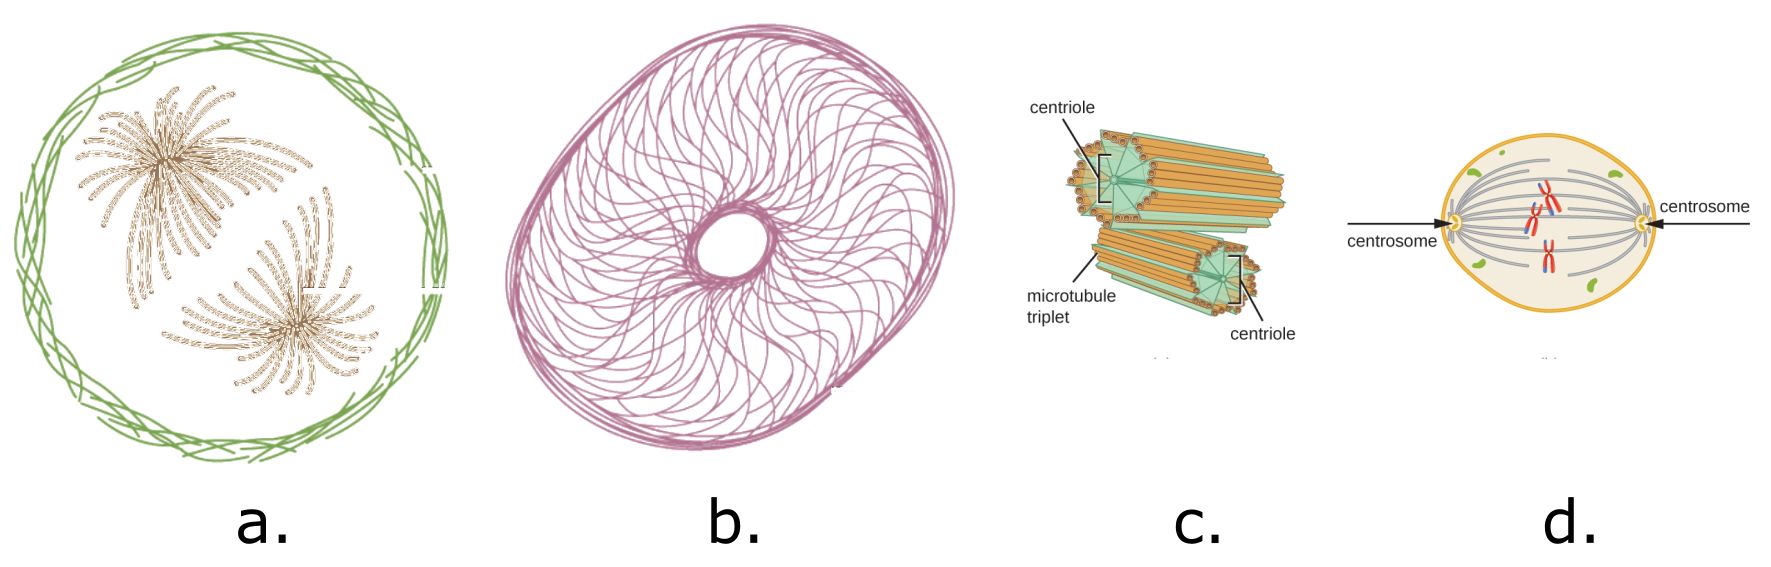 Image a shows a diagram of a section through an idealized eukaryotic cell that spotlights microtubules and microfilaments. Image c shows intermediate filaments are shown. Image c shows centrosomes as short tubes. The outside of these tubes is made of 9 sets of microtubule triplets. These sets are held together by lines labeled centrioles. Image d shows centrosomes on the two poles of a cell. Lines connect the centrosomes to chromosomes in the center of the cell.